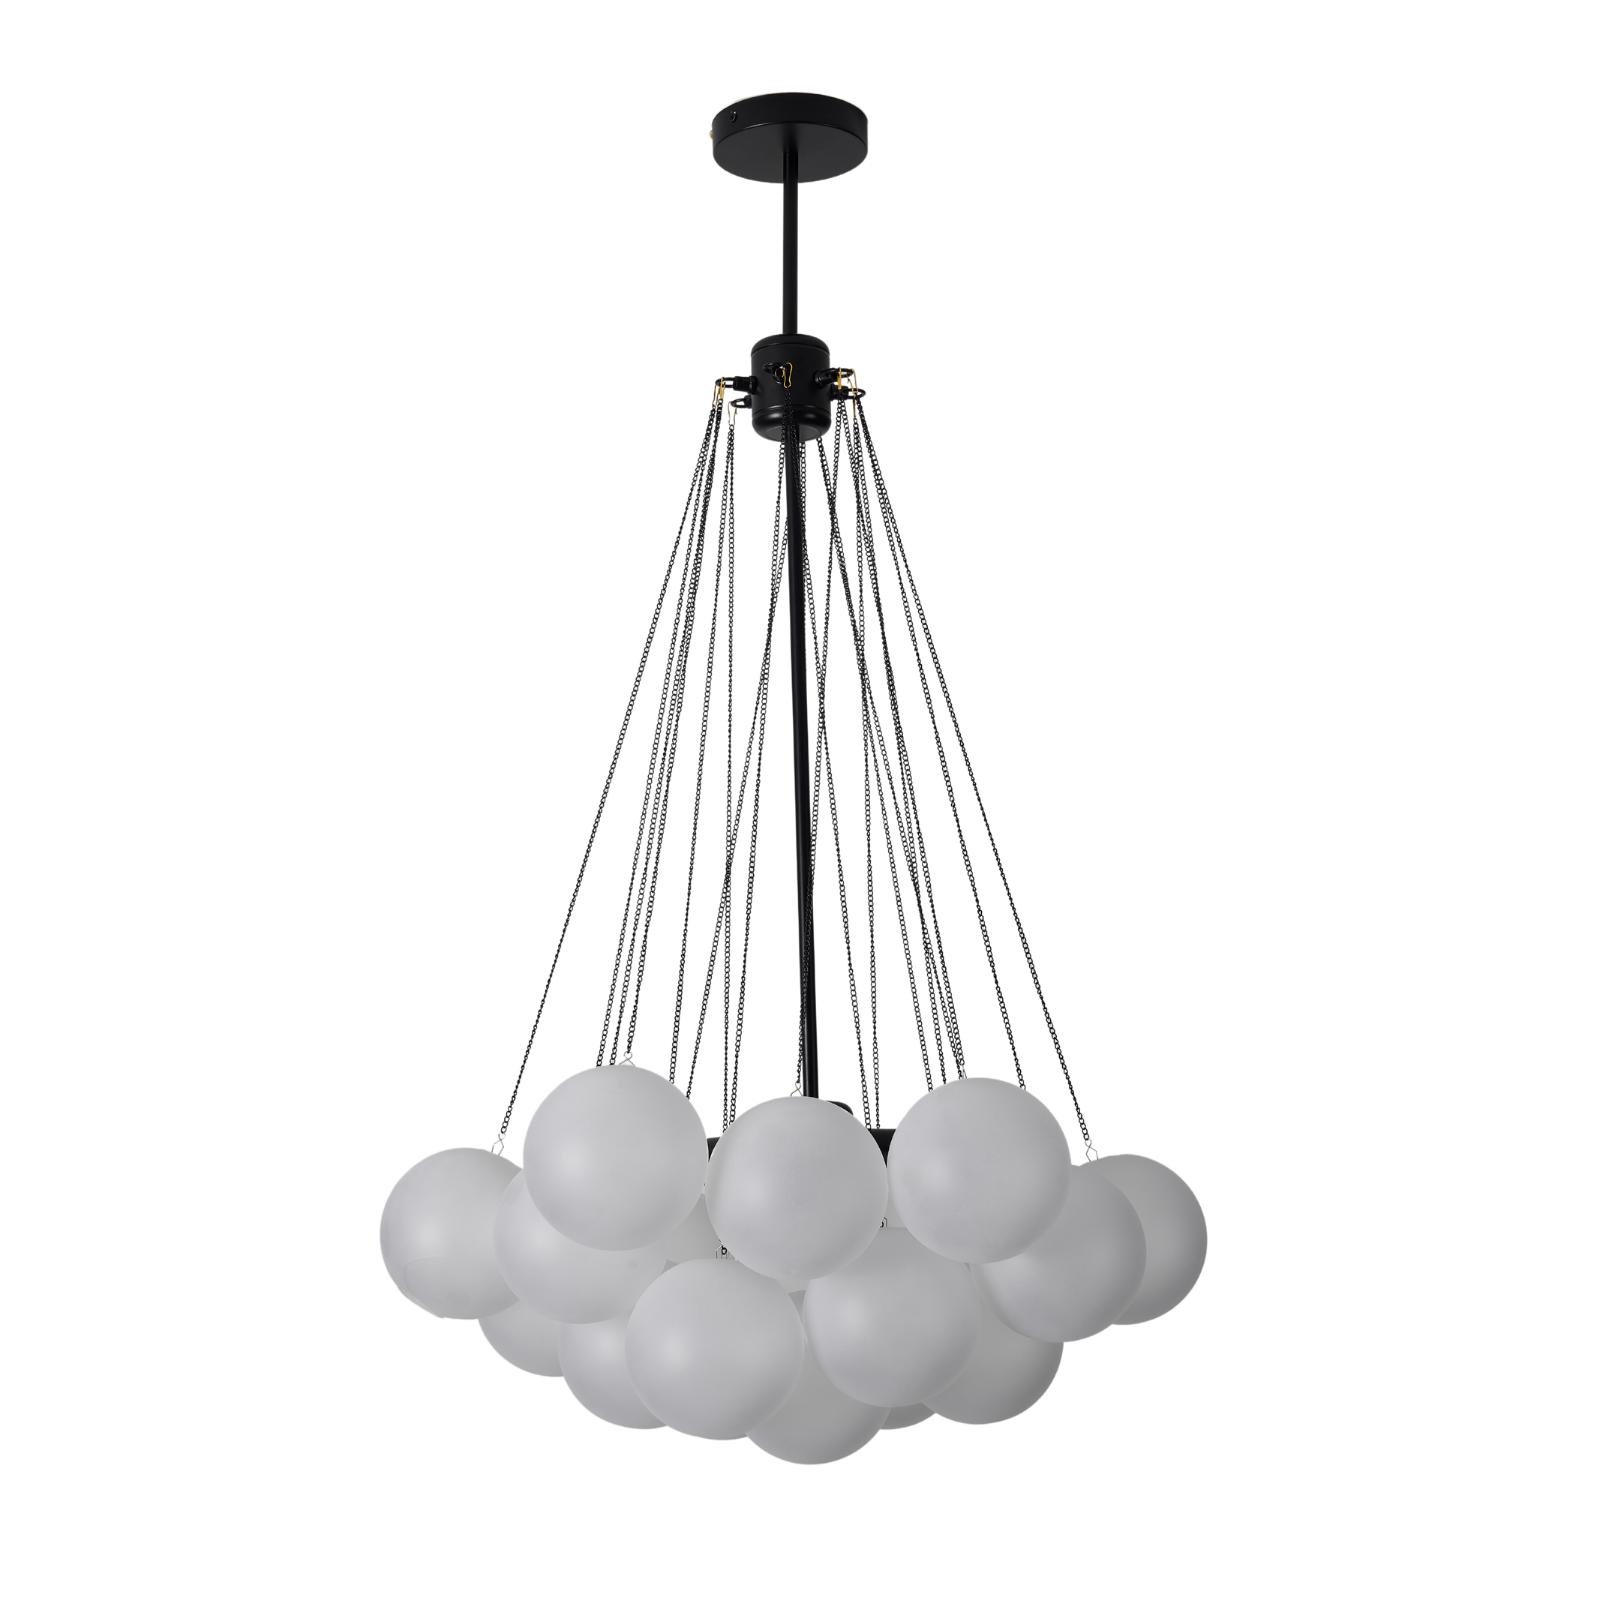 Cloud Hanglamp - By Suitta